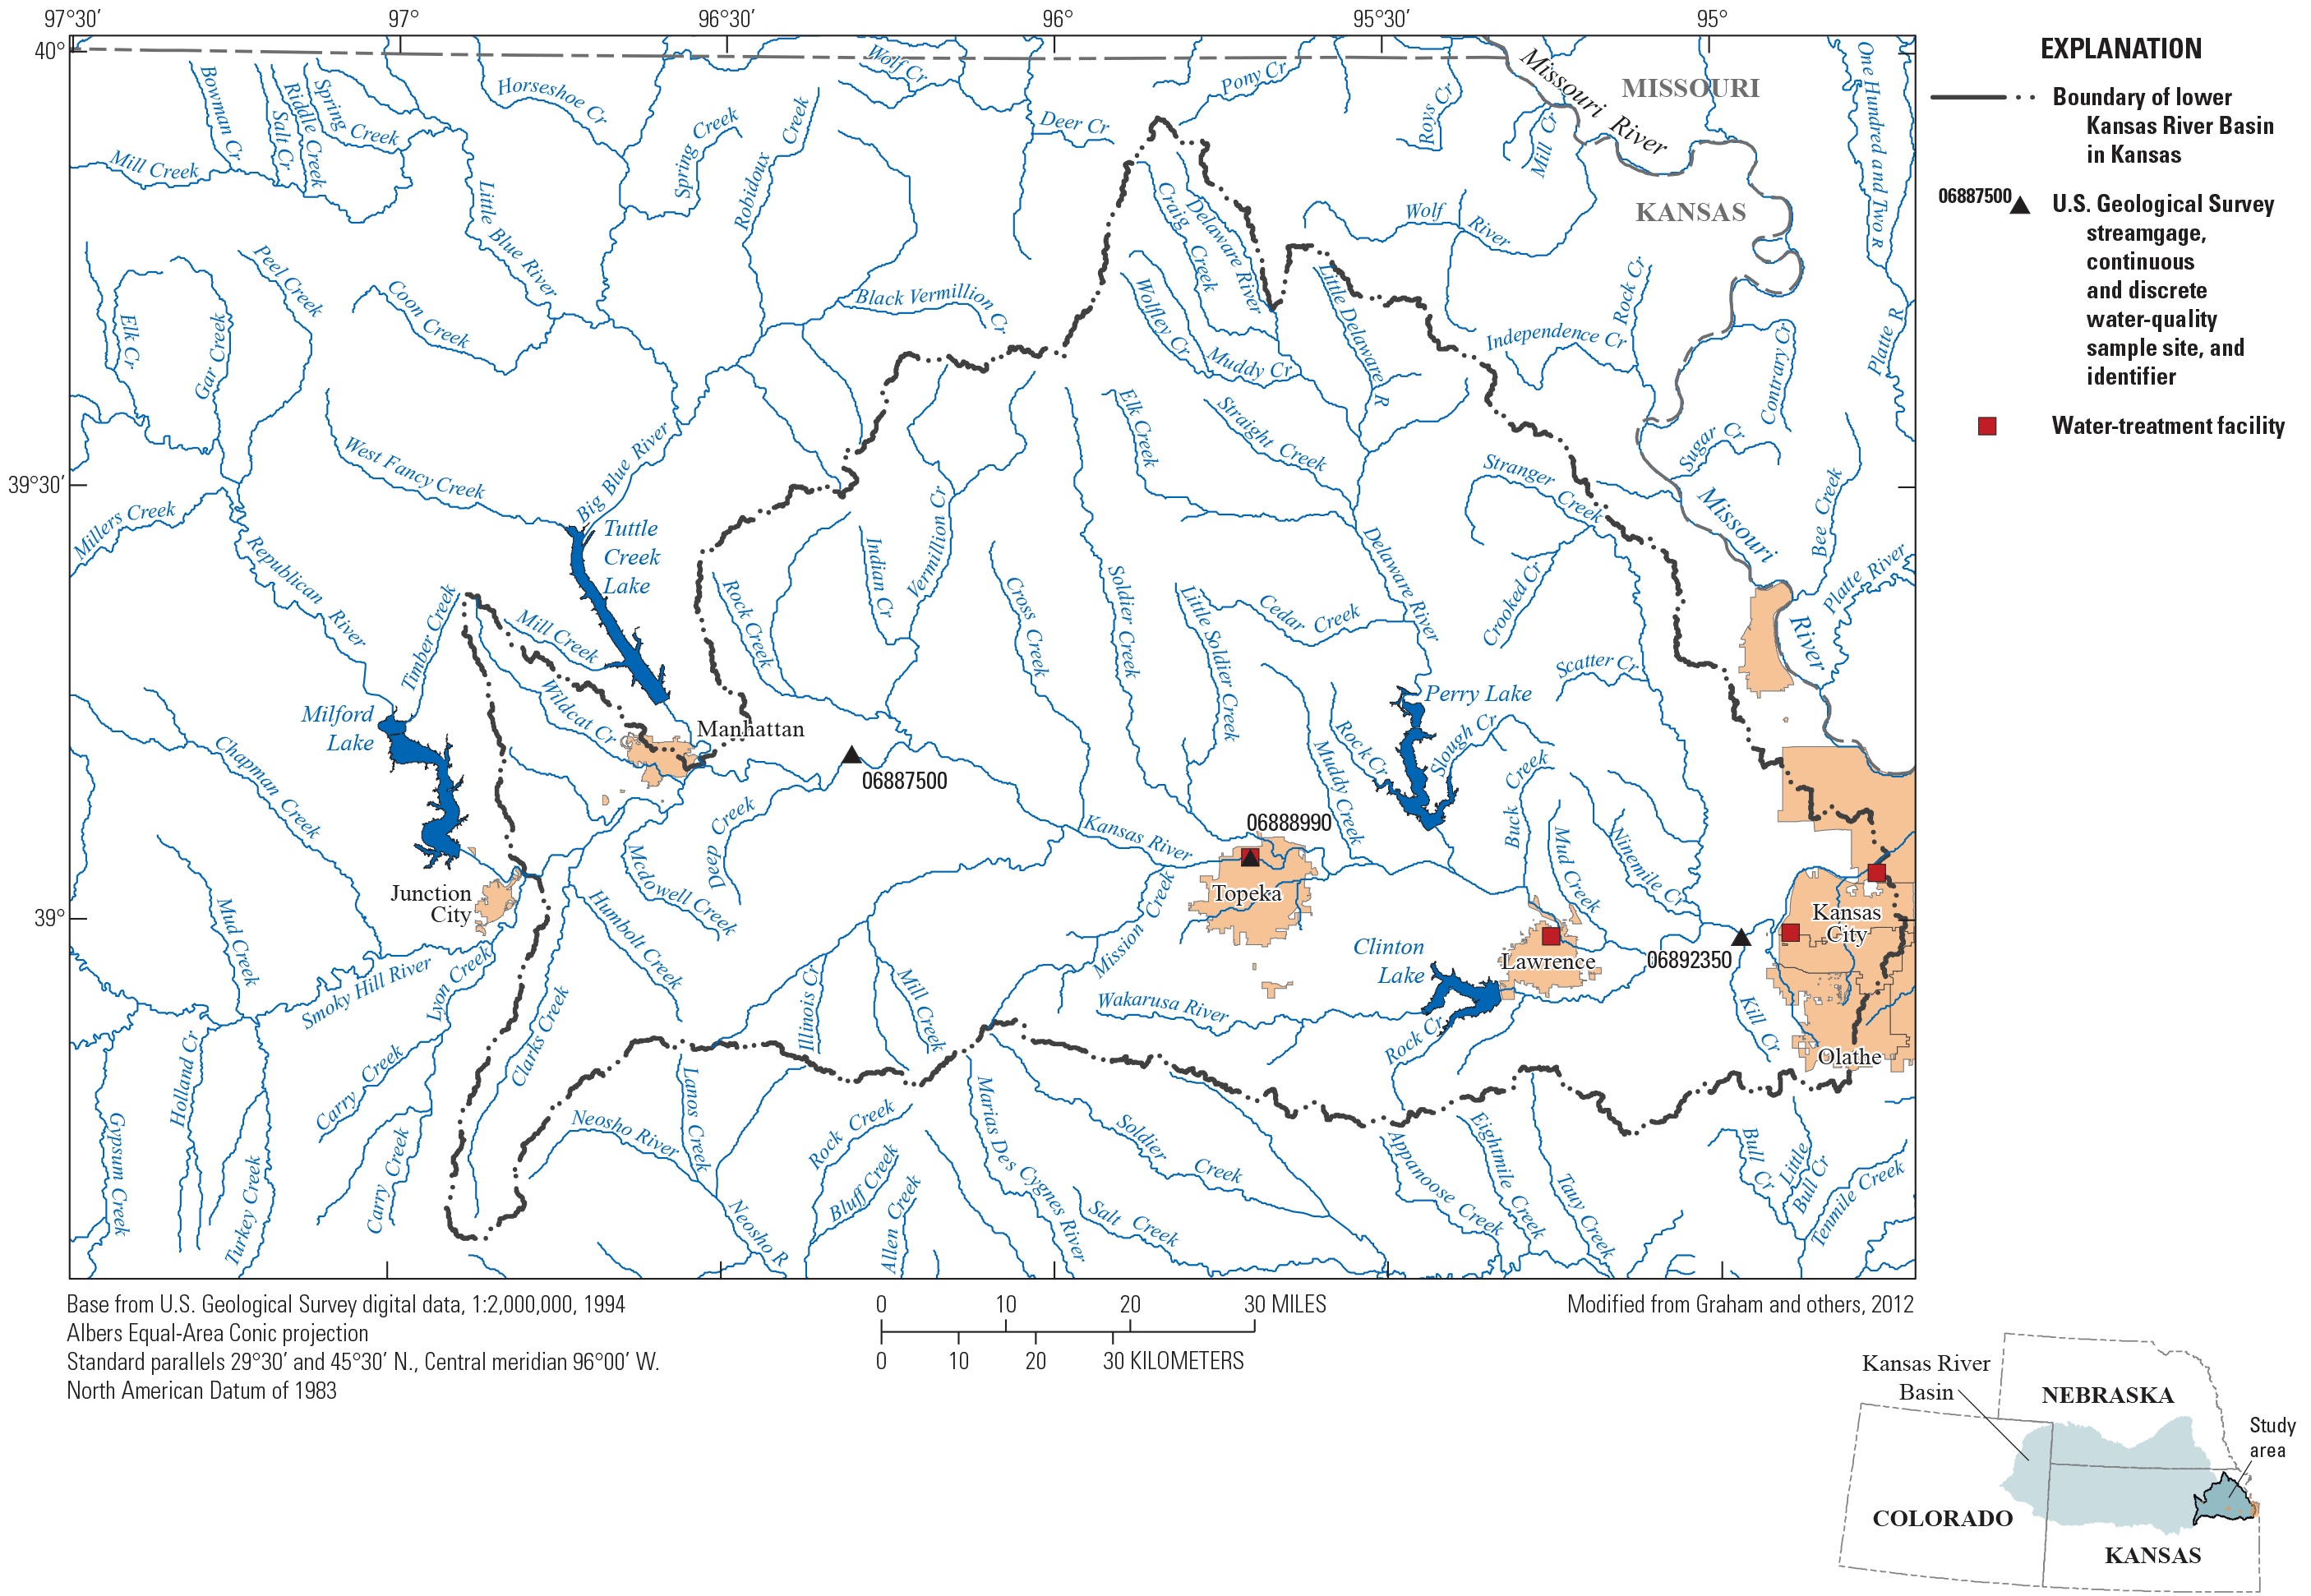 U.S. Geological Survey streamgages and water-treatment facilities are shown in the
                     lower Kansas River Basin.